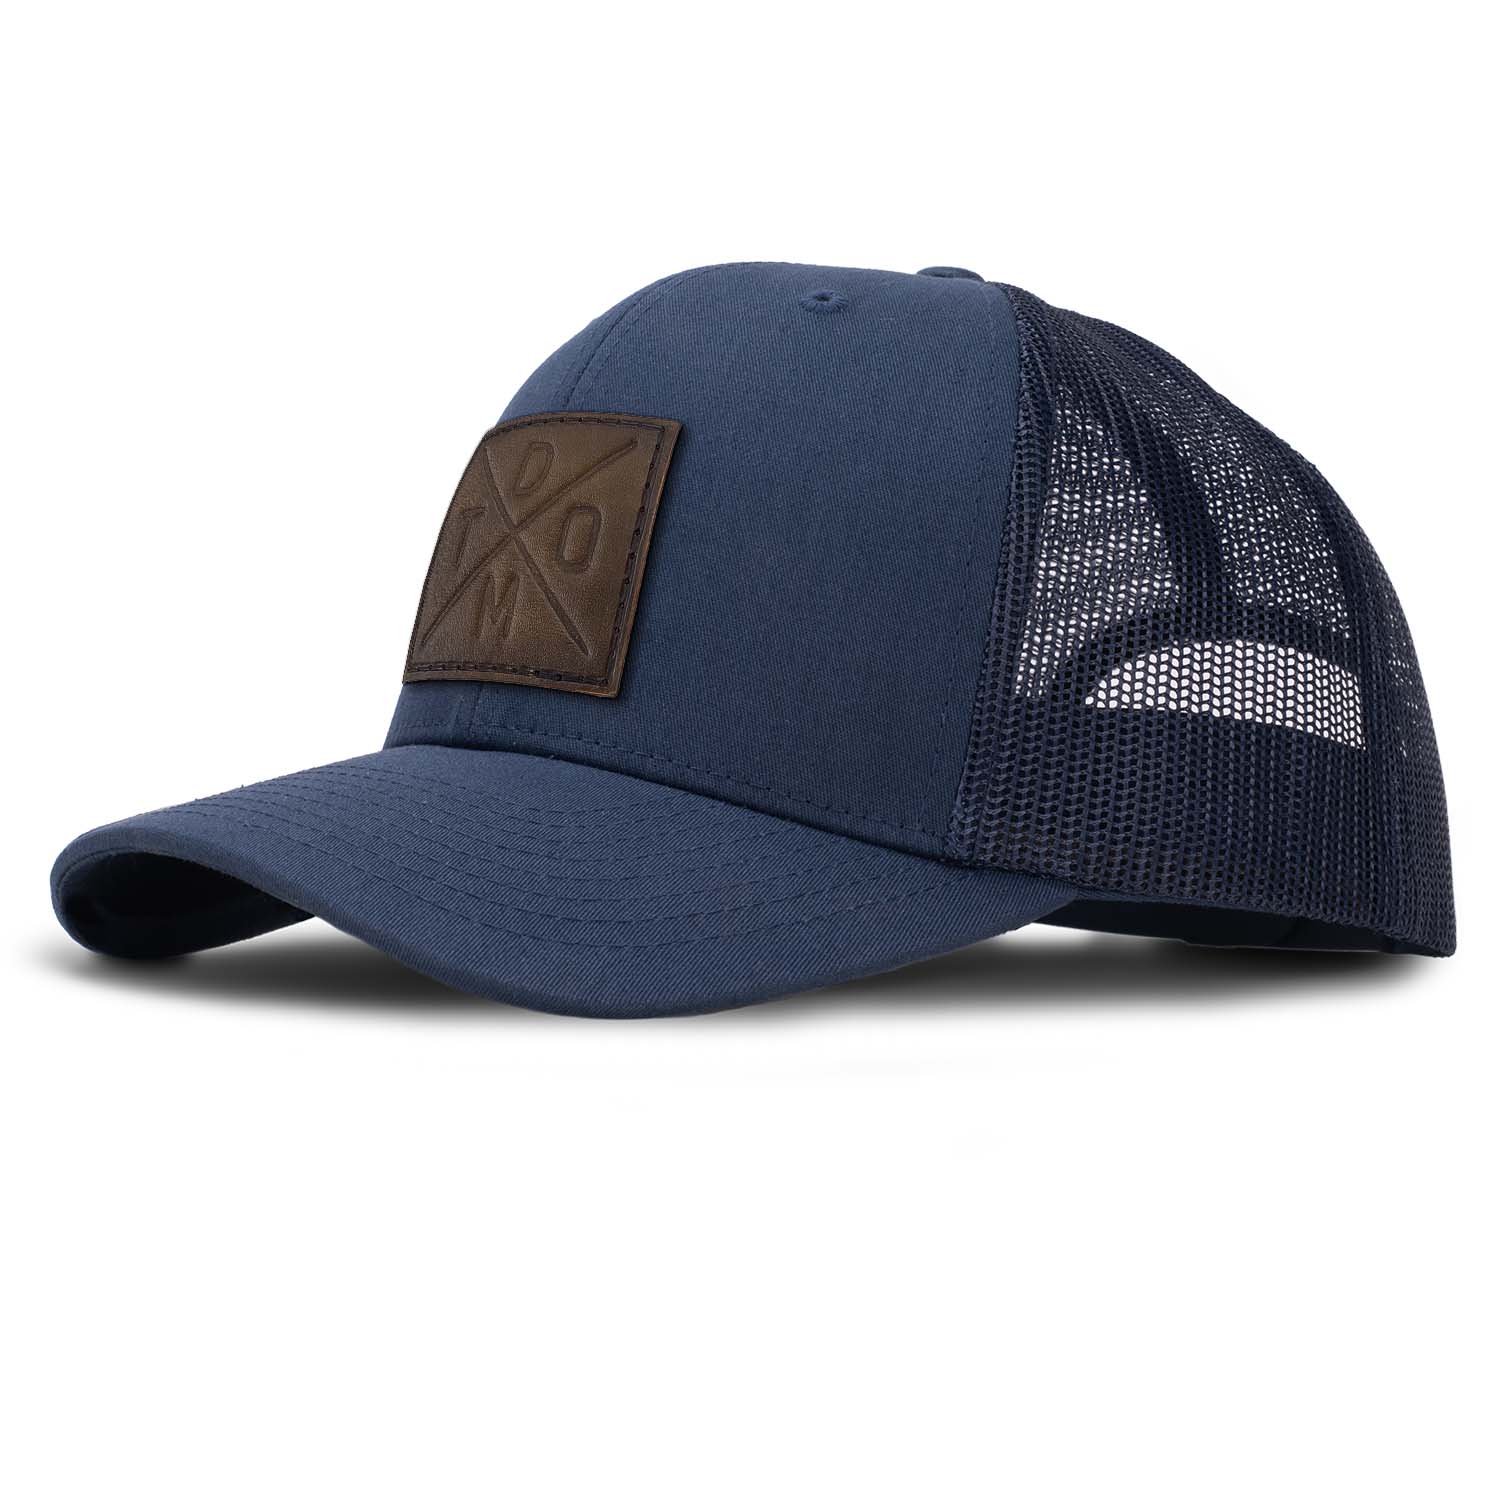 Revolution Mfg full grain leather debossed don't tread on me DTOM patch on a navy trucker hat with navy mesh